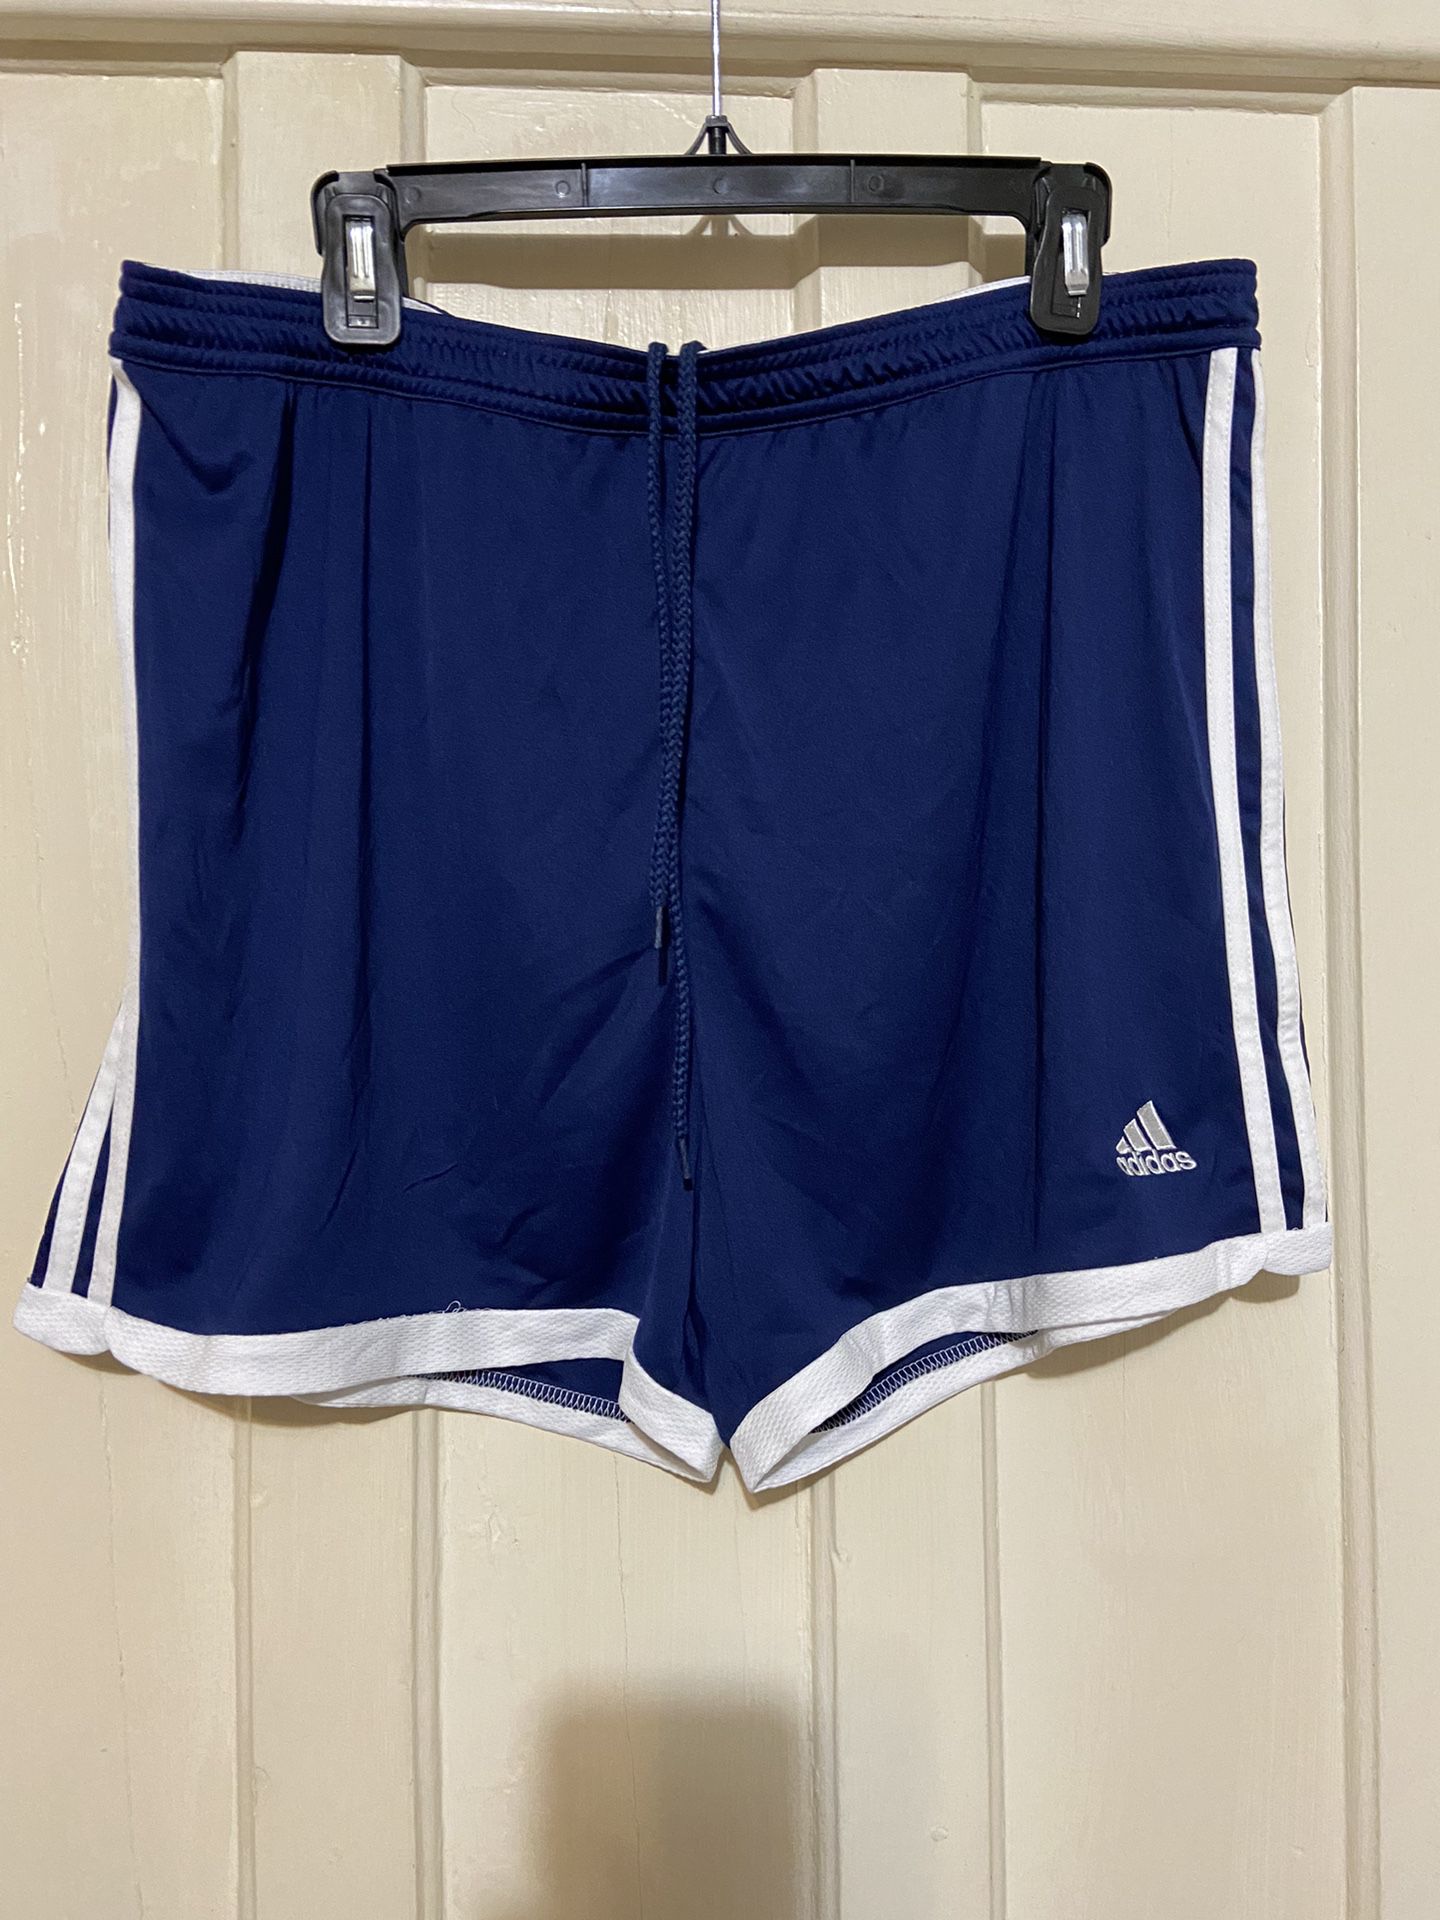 Adidas Claimcool Mens Shorts Size XL Navy Blue White 3 Stripe Sports Casual Athletic